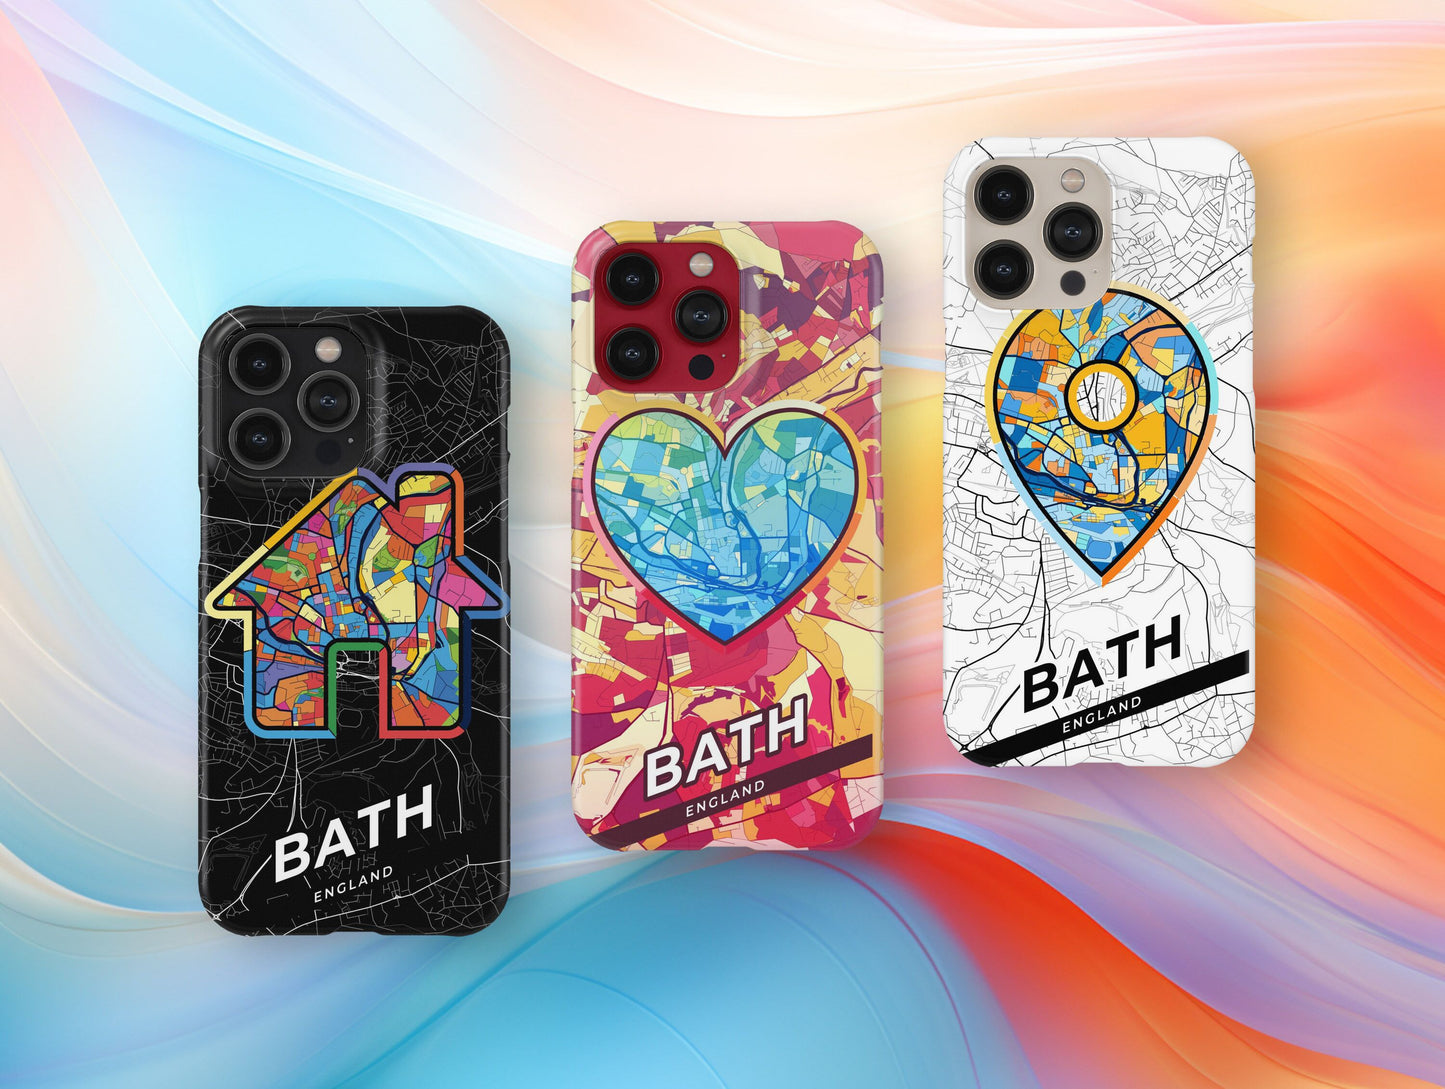 Bath England slim phone case with colorful icon. Birthday, wedding or housewarming gift. Couple match cases.